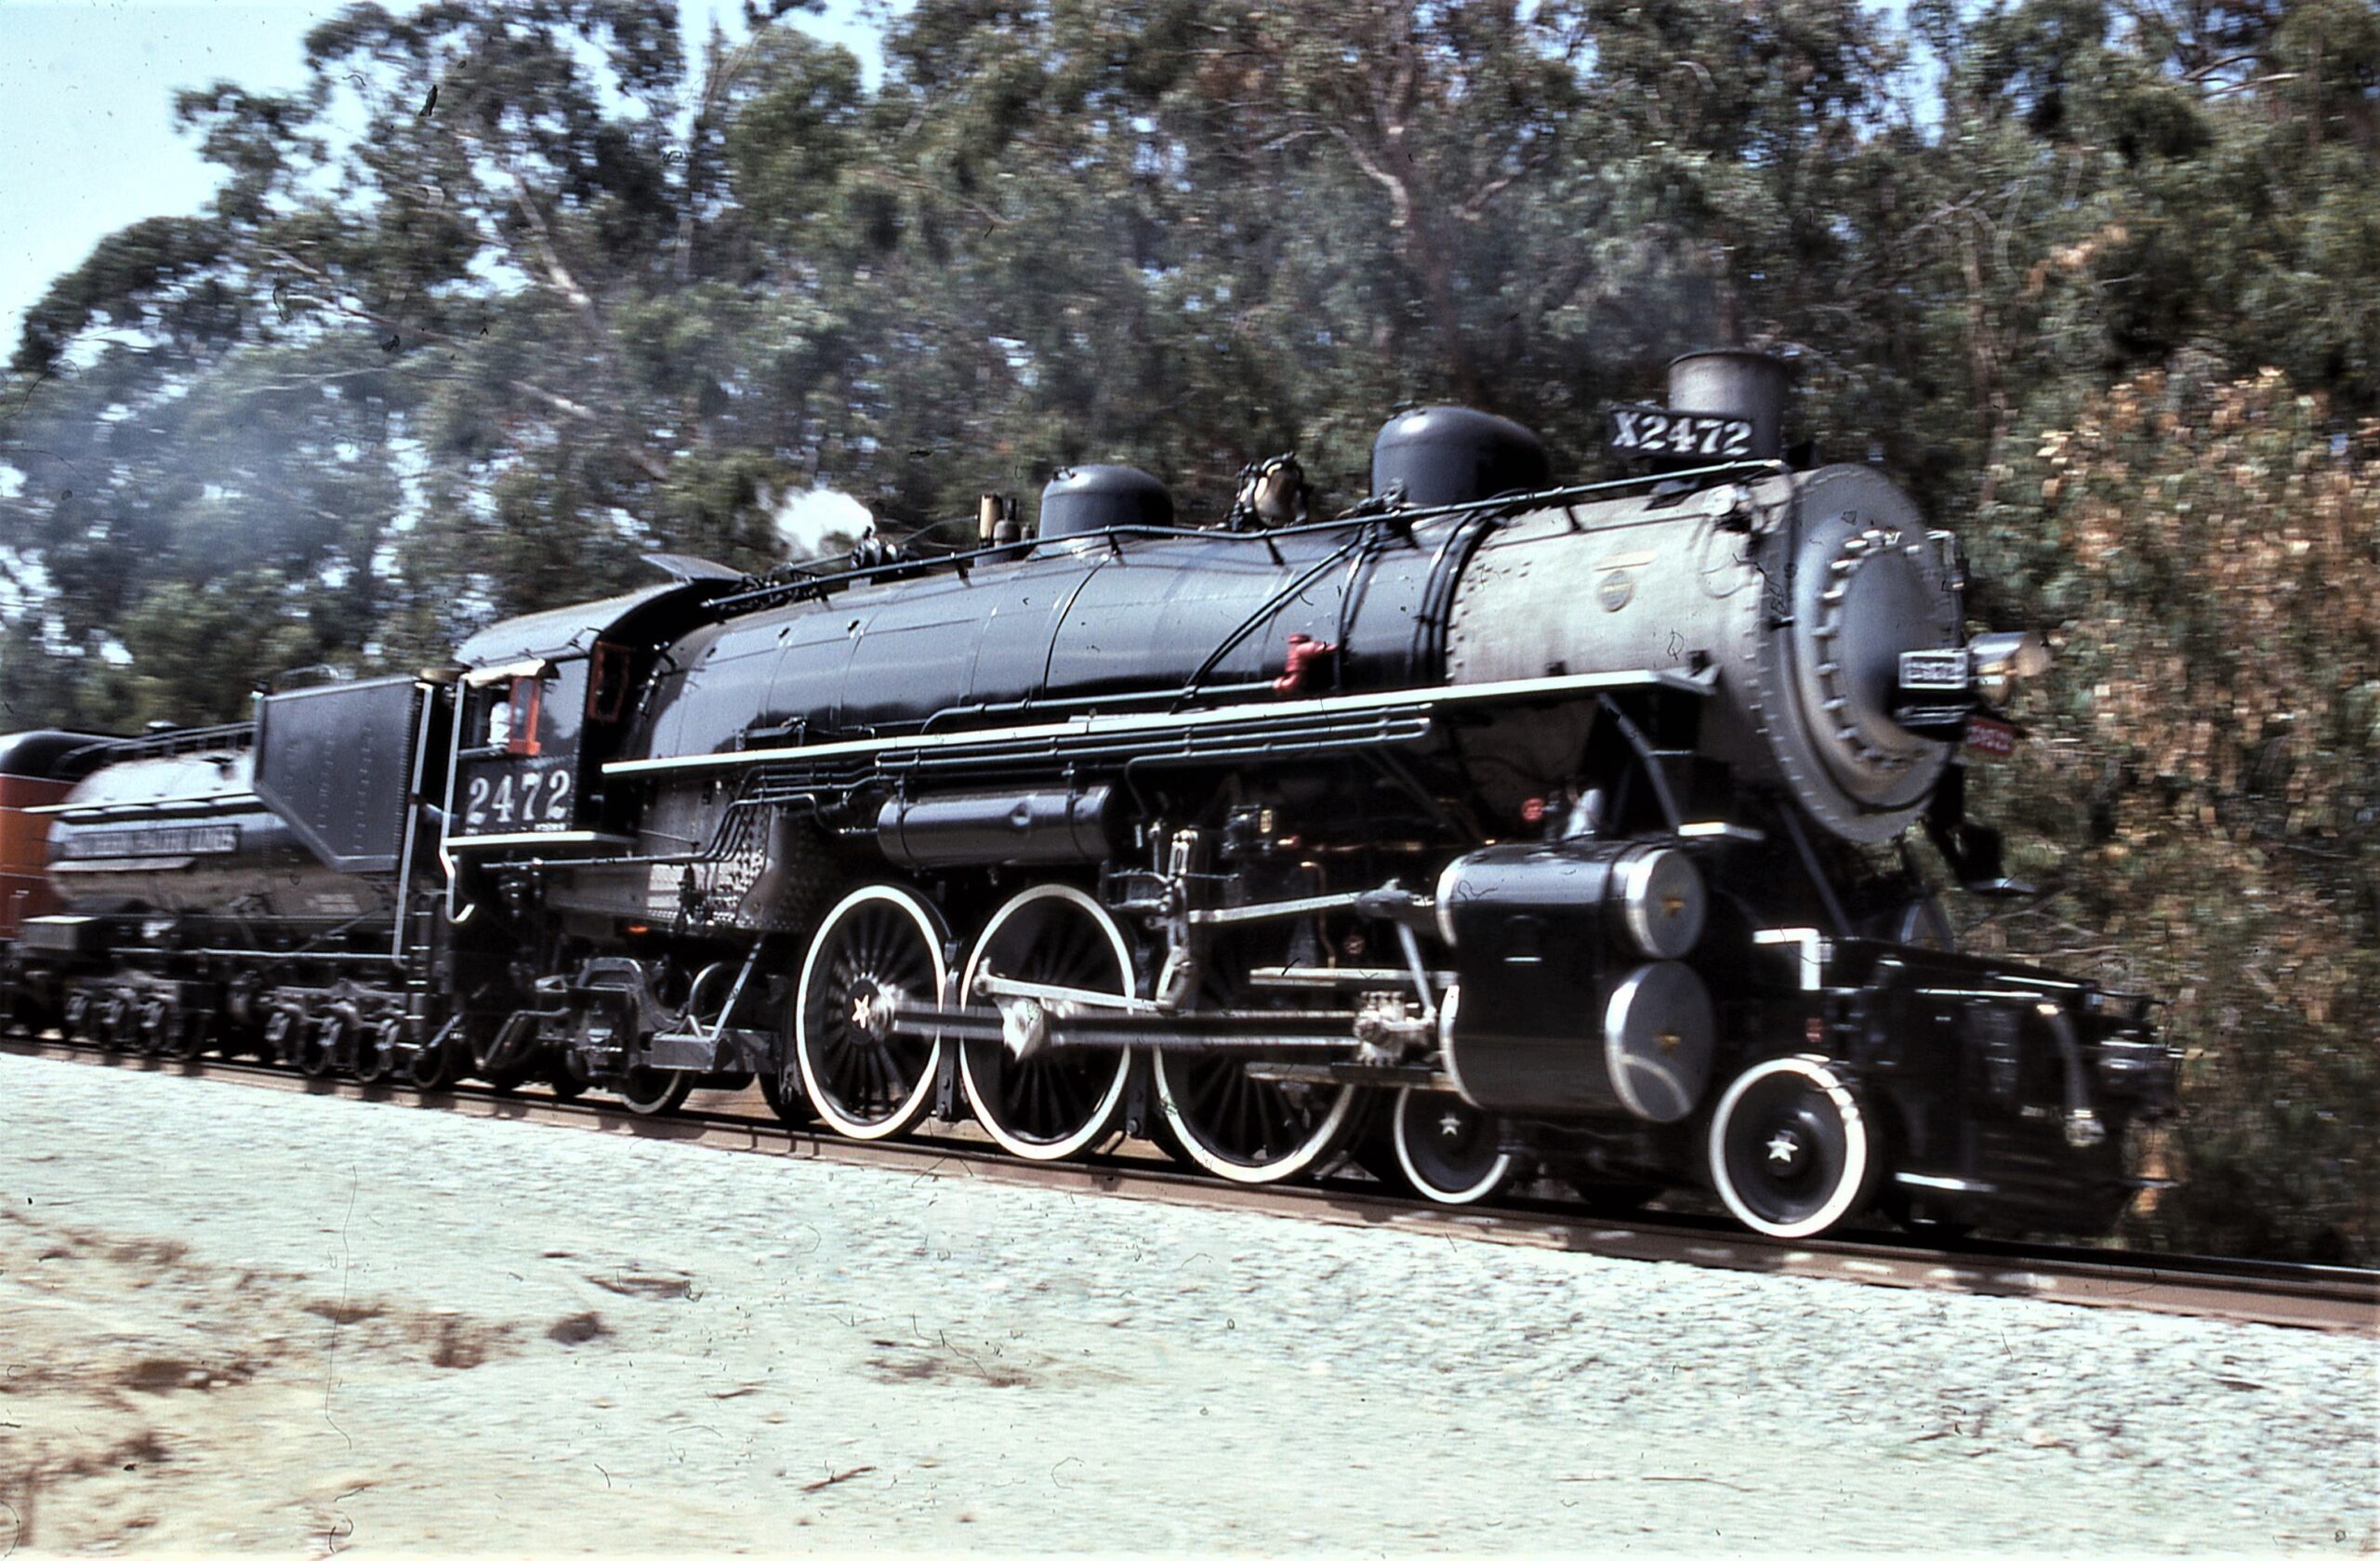 Southern Pacific Lines | Santa Barbera, California | Class P-8 4-6-2 #2472  “Pacific” steam locomotive | 1992 | R.L. Westover photograph | Steve Timko Collection